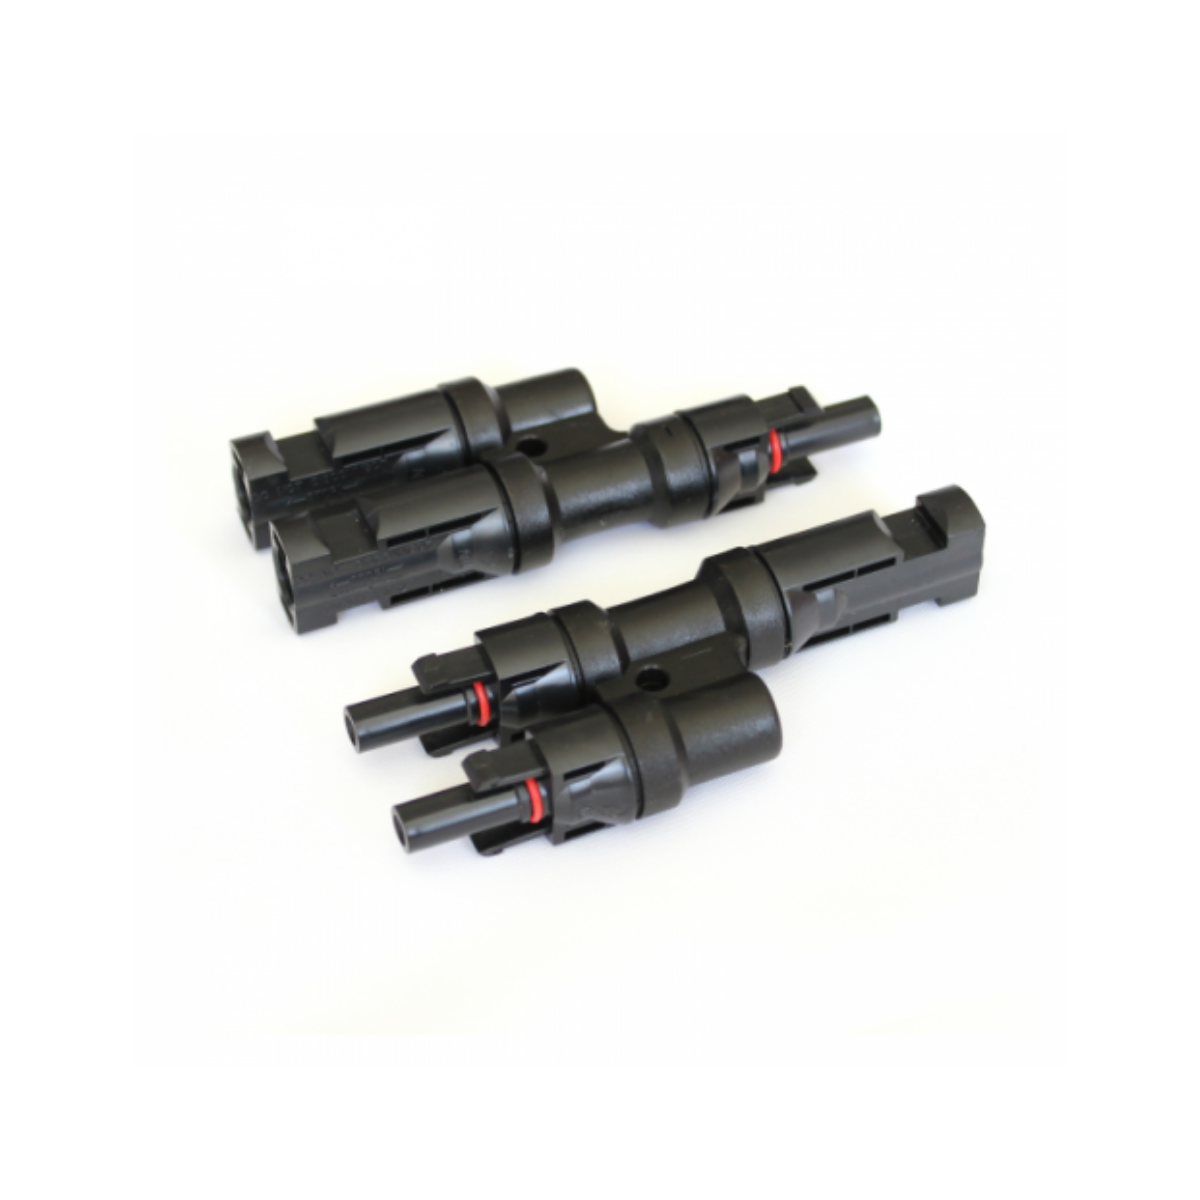 Pair of MC4 Compatible 2-to-1 T-Branch Cable Connectors For Solar Panels